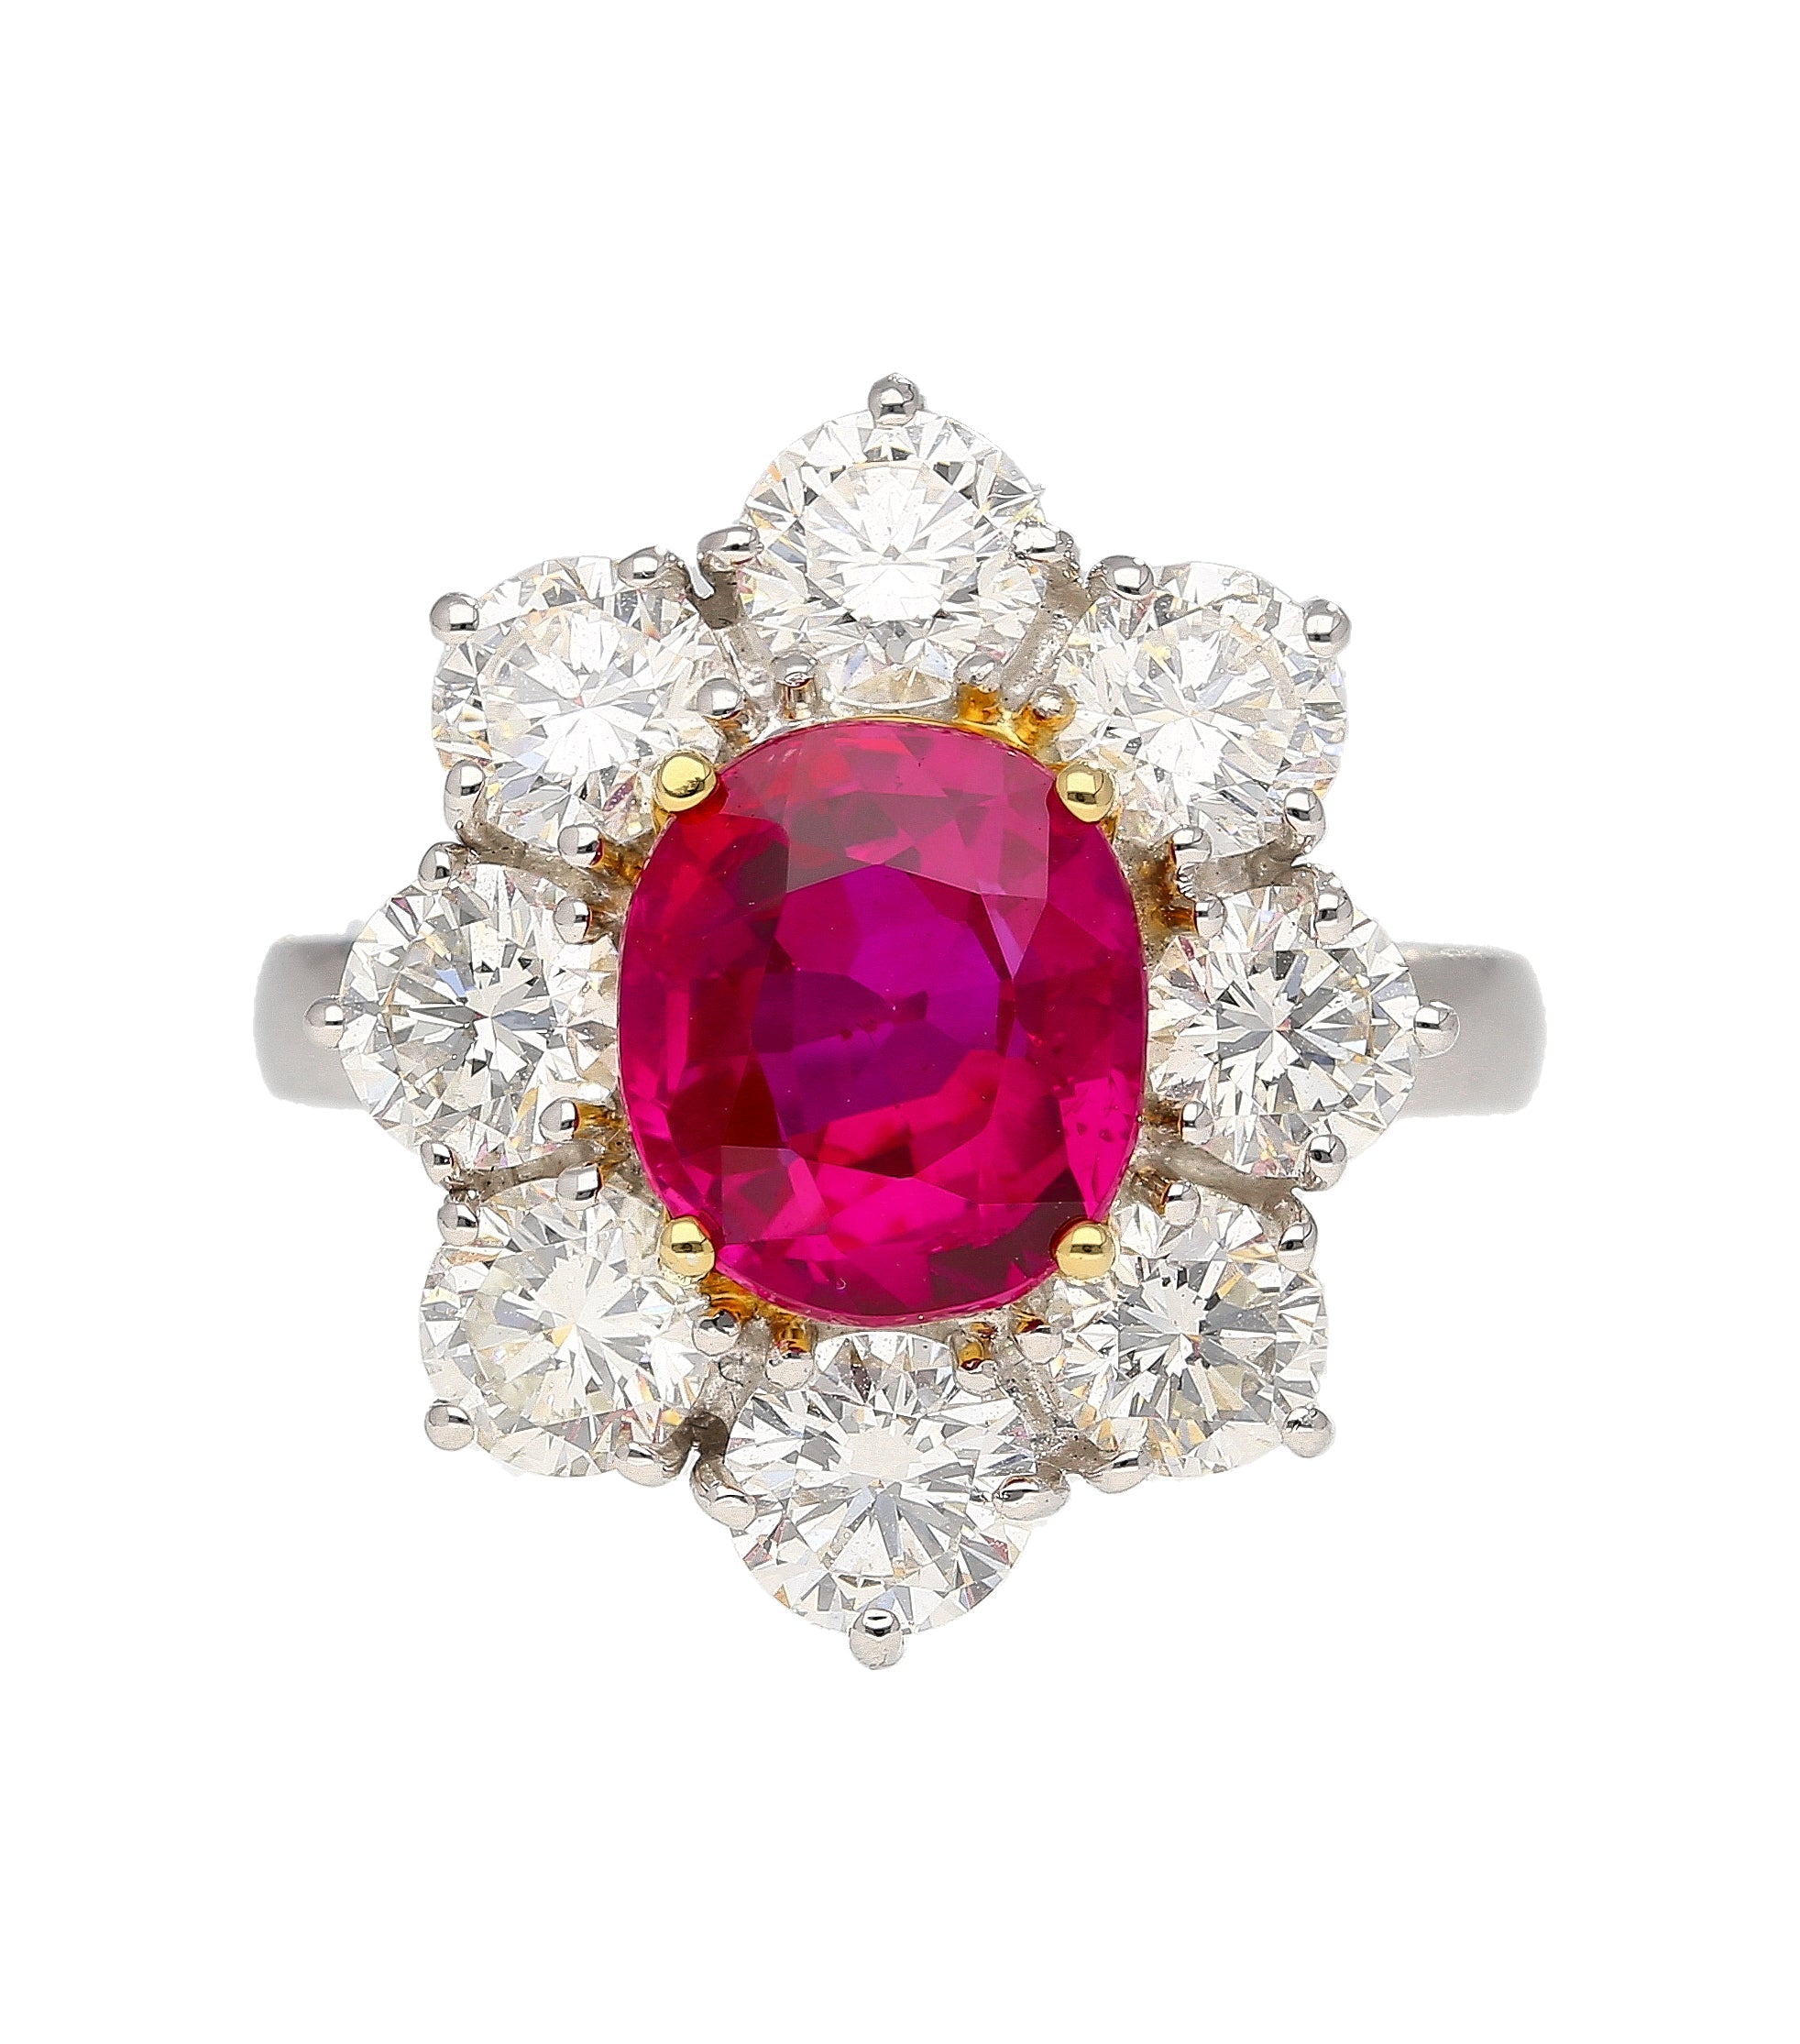 3.80 Carat Oval Cut No Heat Burma Ruby Ring With Round Diamond Halo in Platinum-Rings-ASSAY